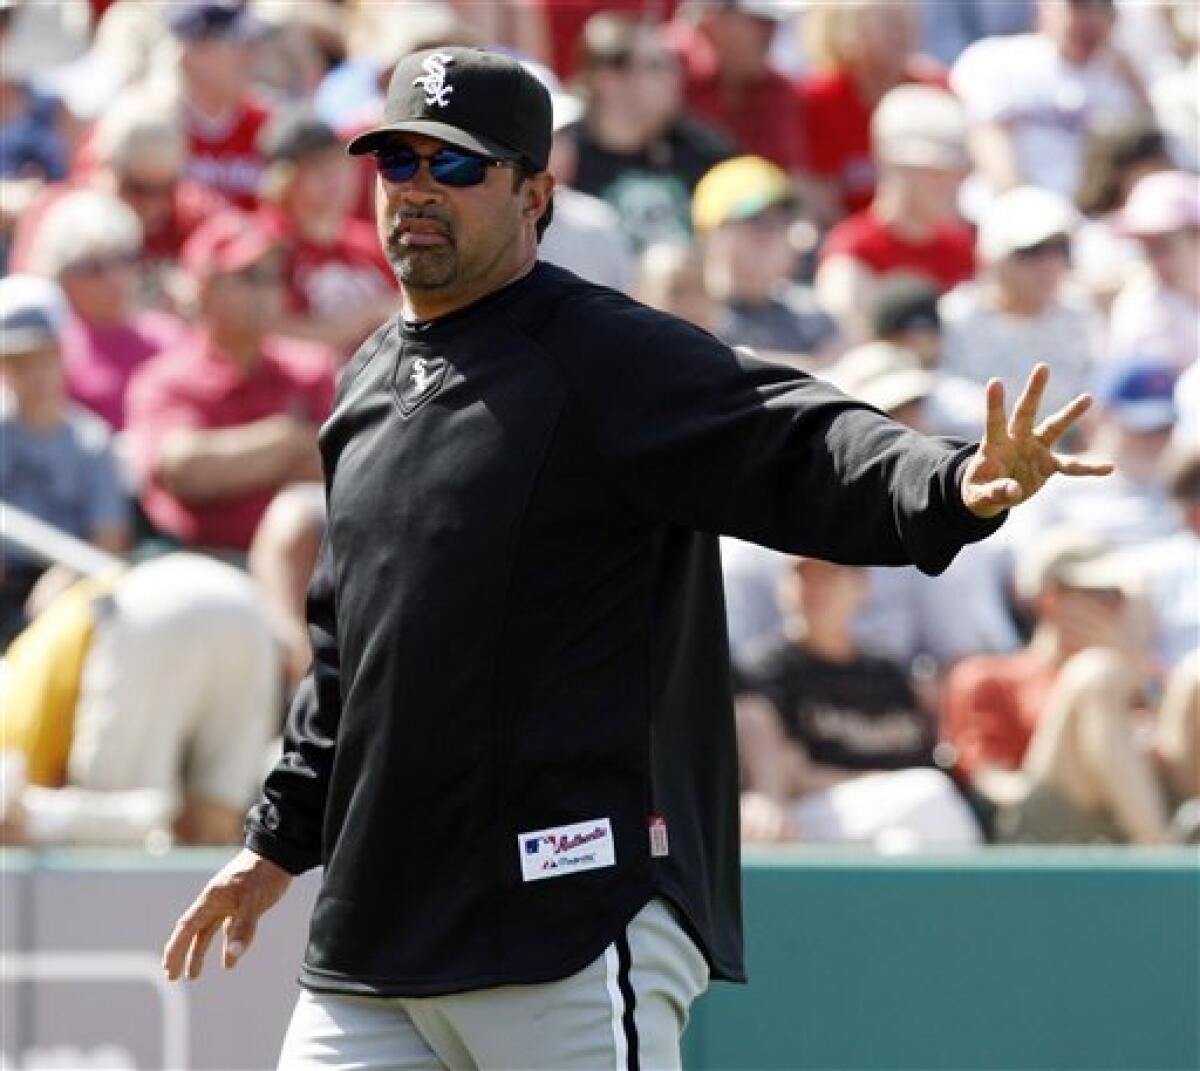 White Sox spring included tweeting tussle - The San Diego Union